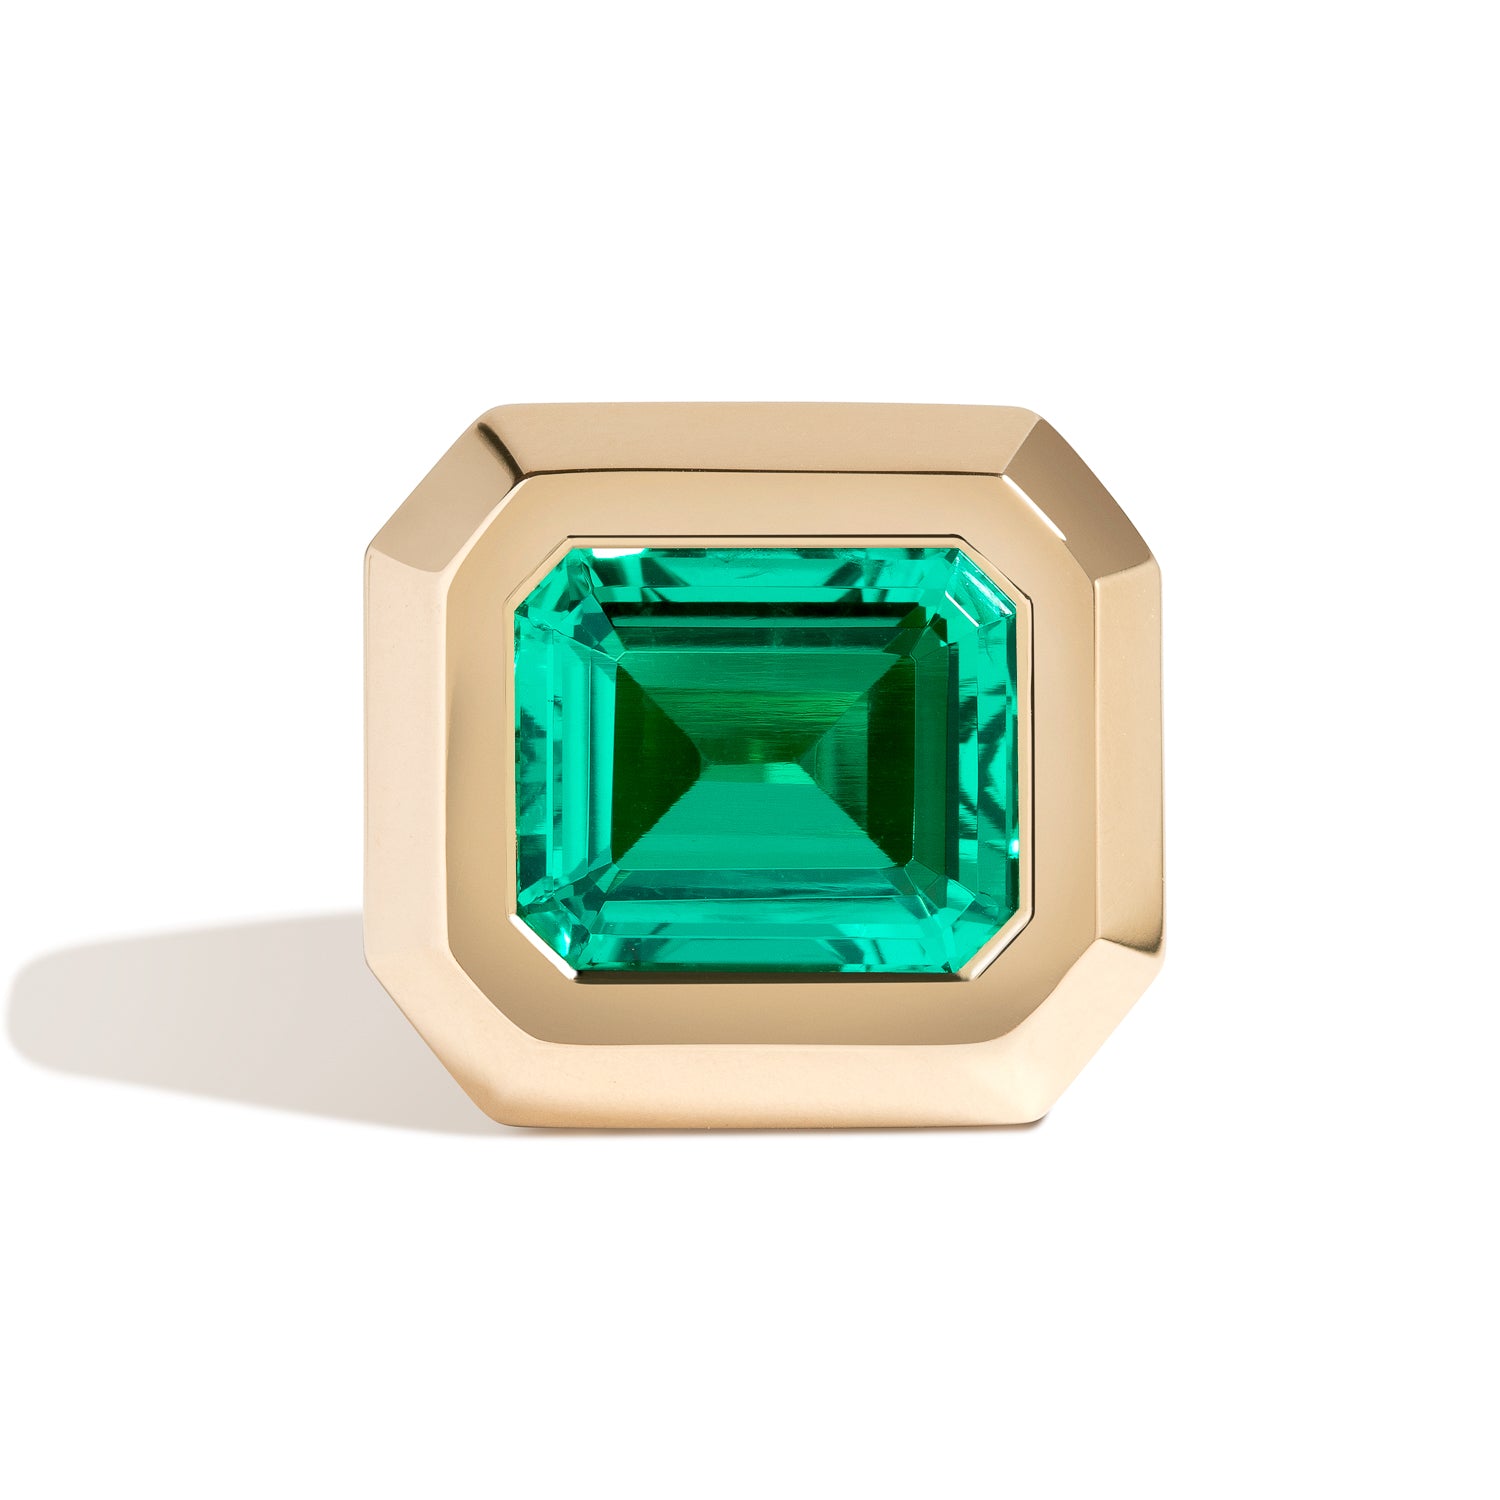 Super Bowl Ring 14K Rose Gold / Cultivated Emerald (5.65 carats)